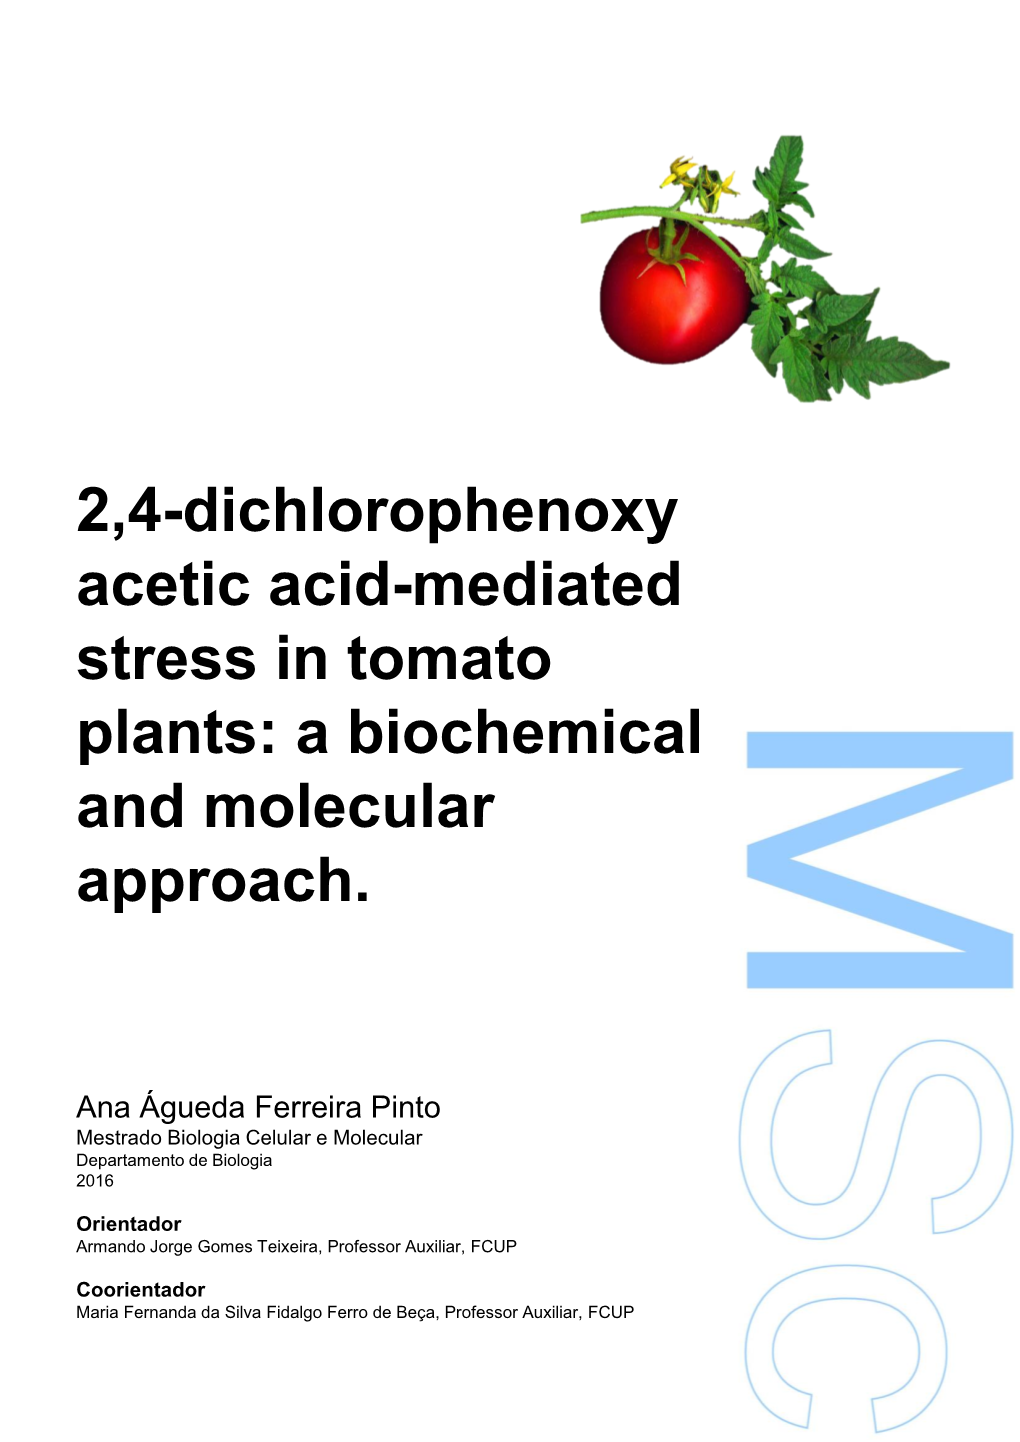 2,4-Dichlorophenoxy Acetic Acid-Mediated Stress in Tomato Plants: a Biochemical and Molecular Approach